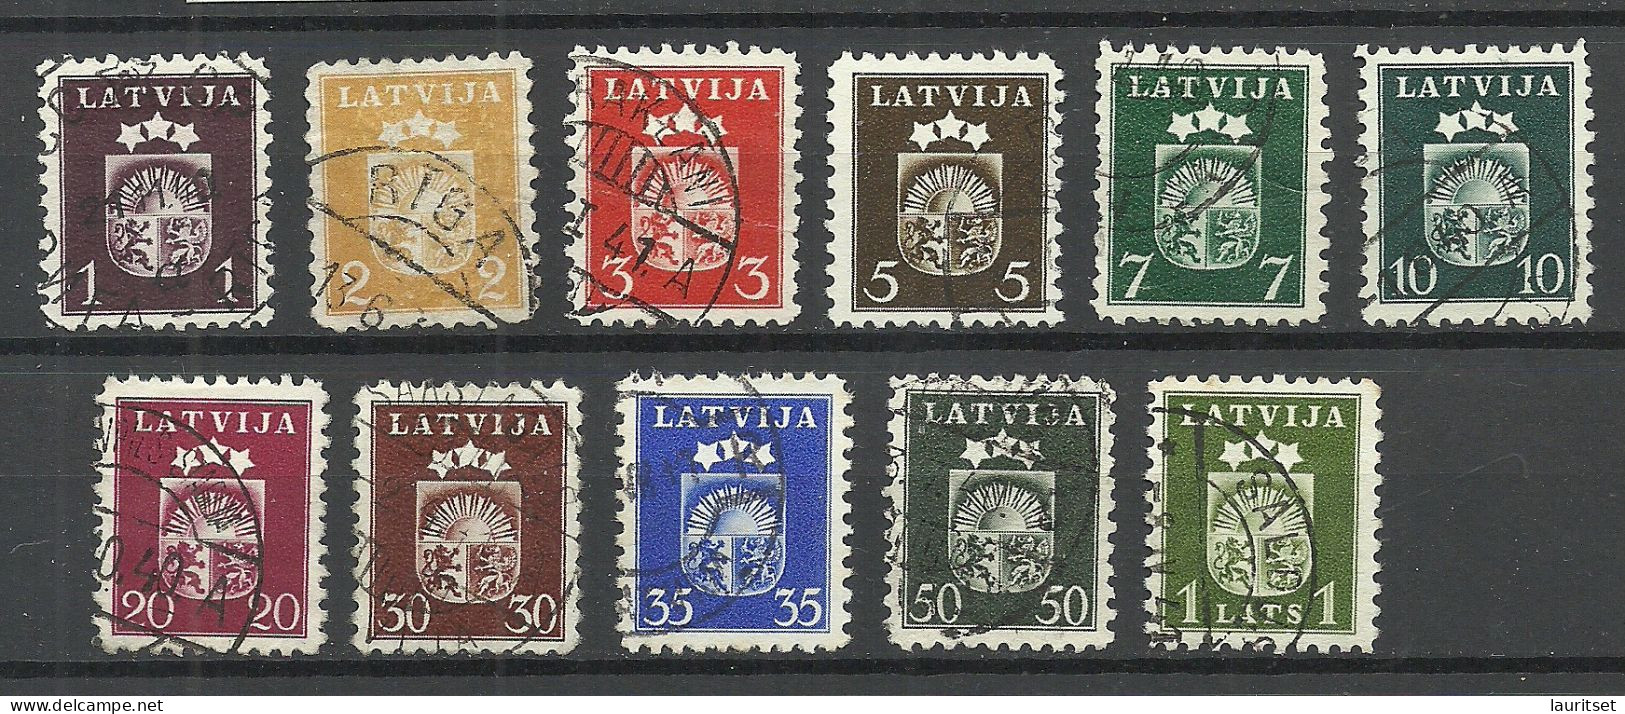 LETTLAND Latvia 1940 Michel 281 - 291 O Wappe Coat Of Arms - Lettonie